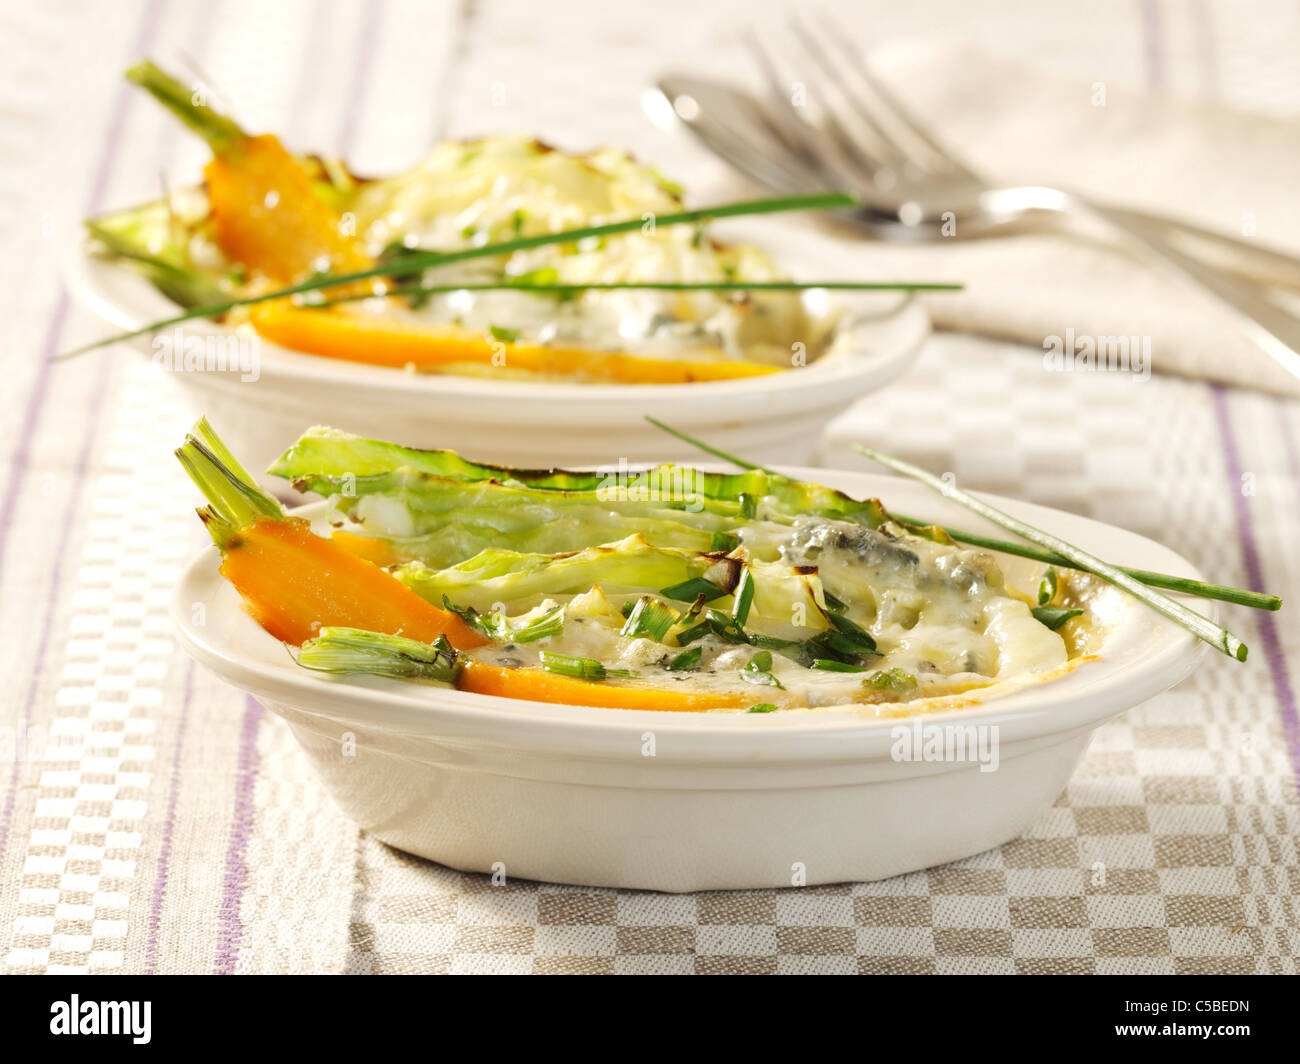 Gratin with sweetheart cabbage and carrots Stock Photo